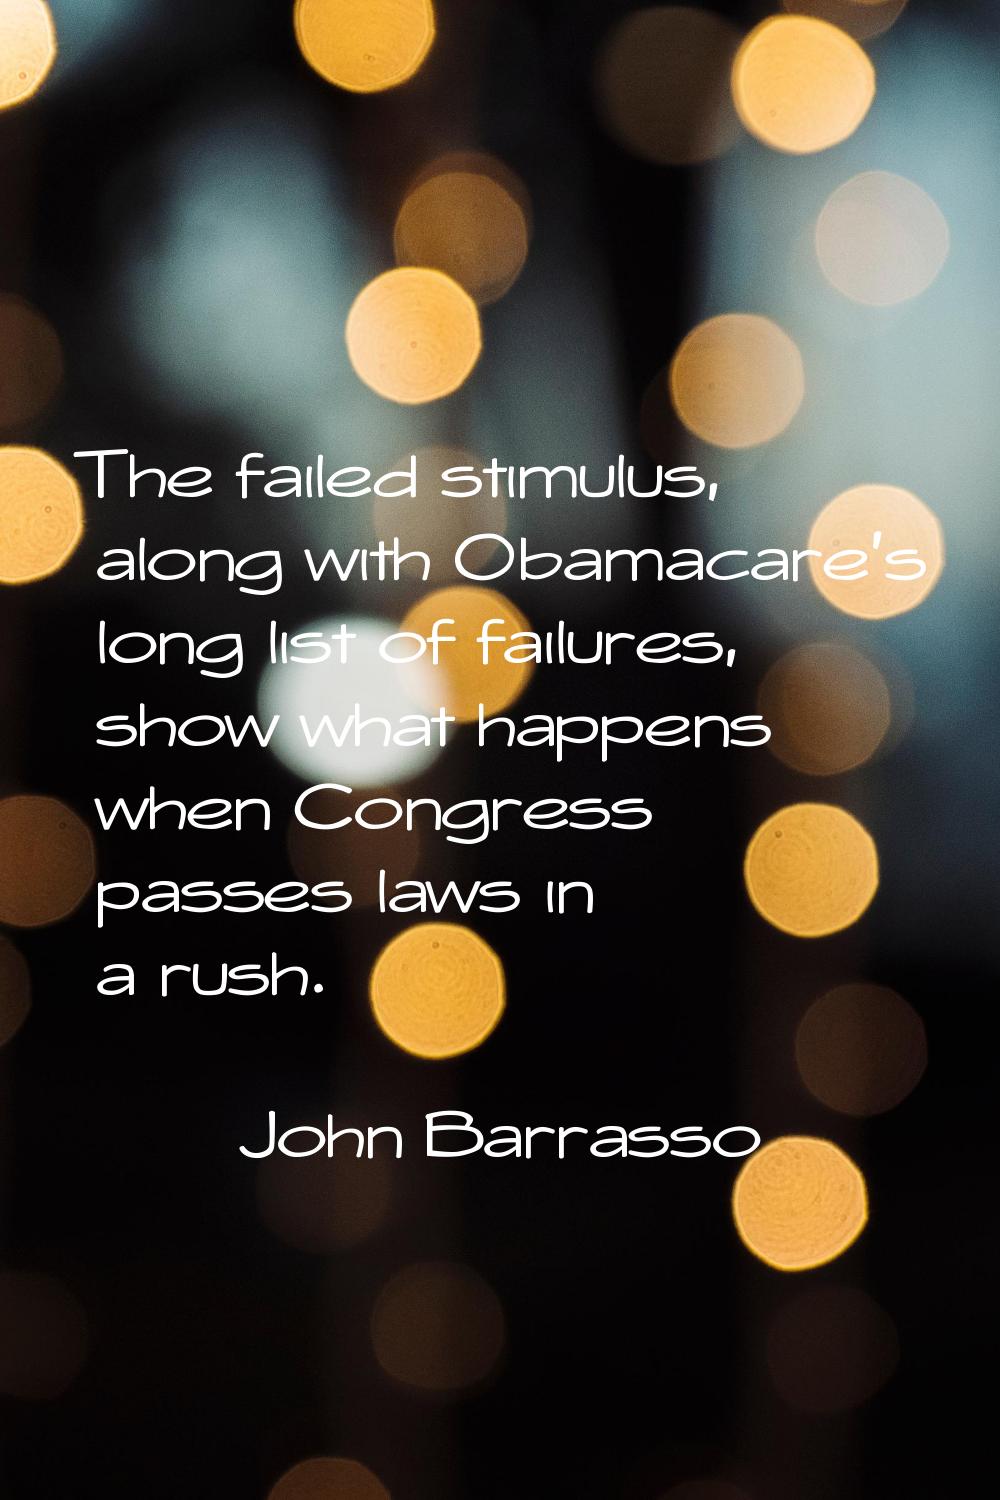 The failed stimulus, along with Obamacare's long list of failures, show what happens when Congress 